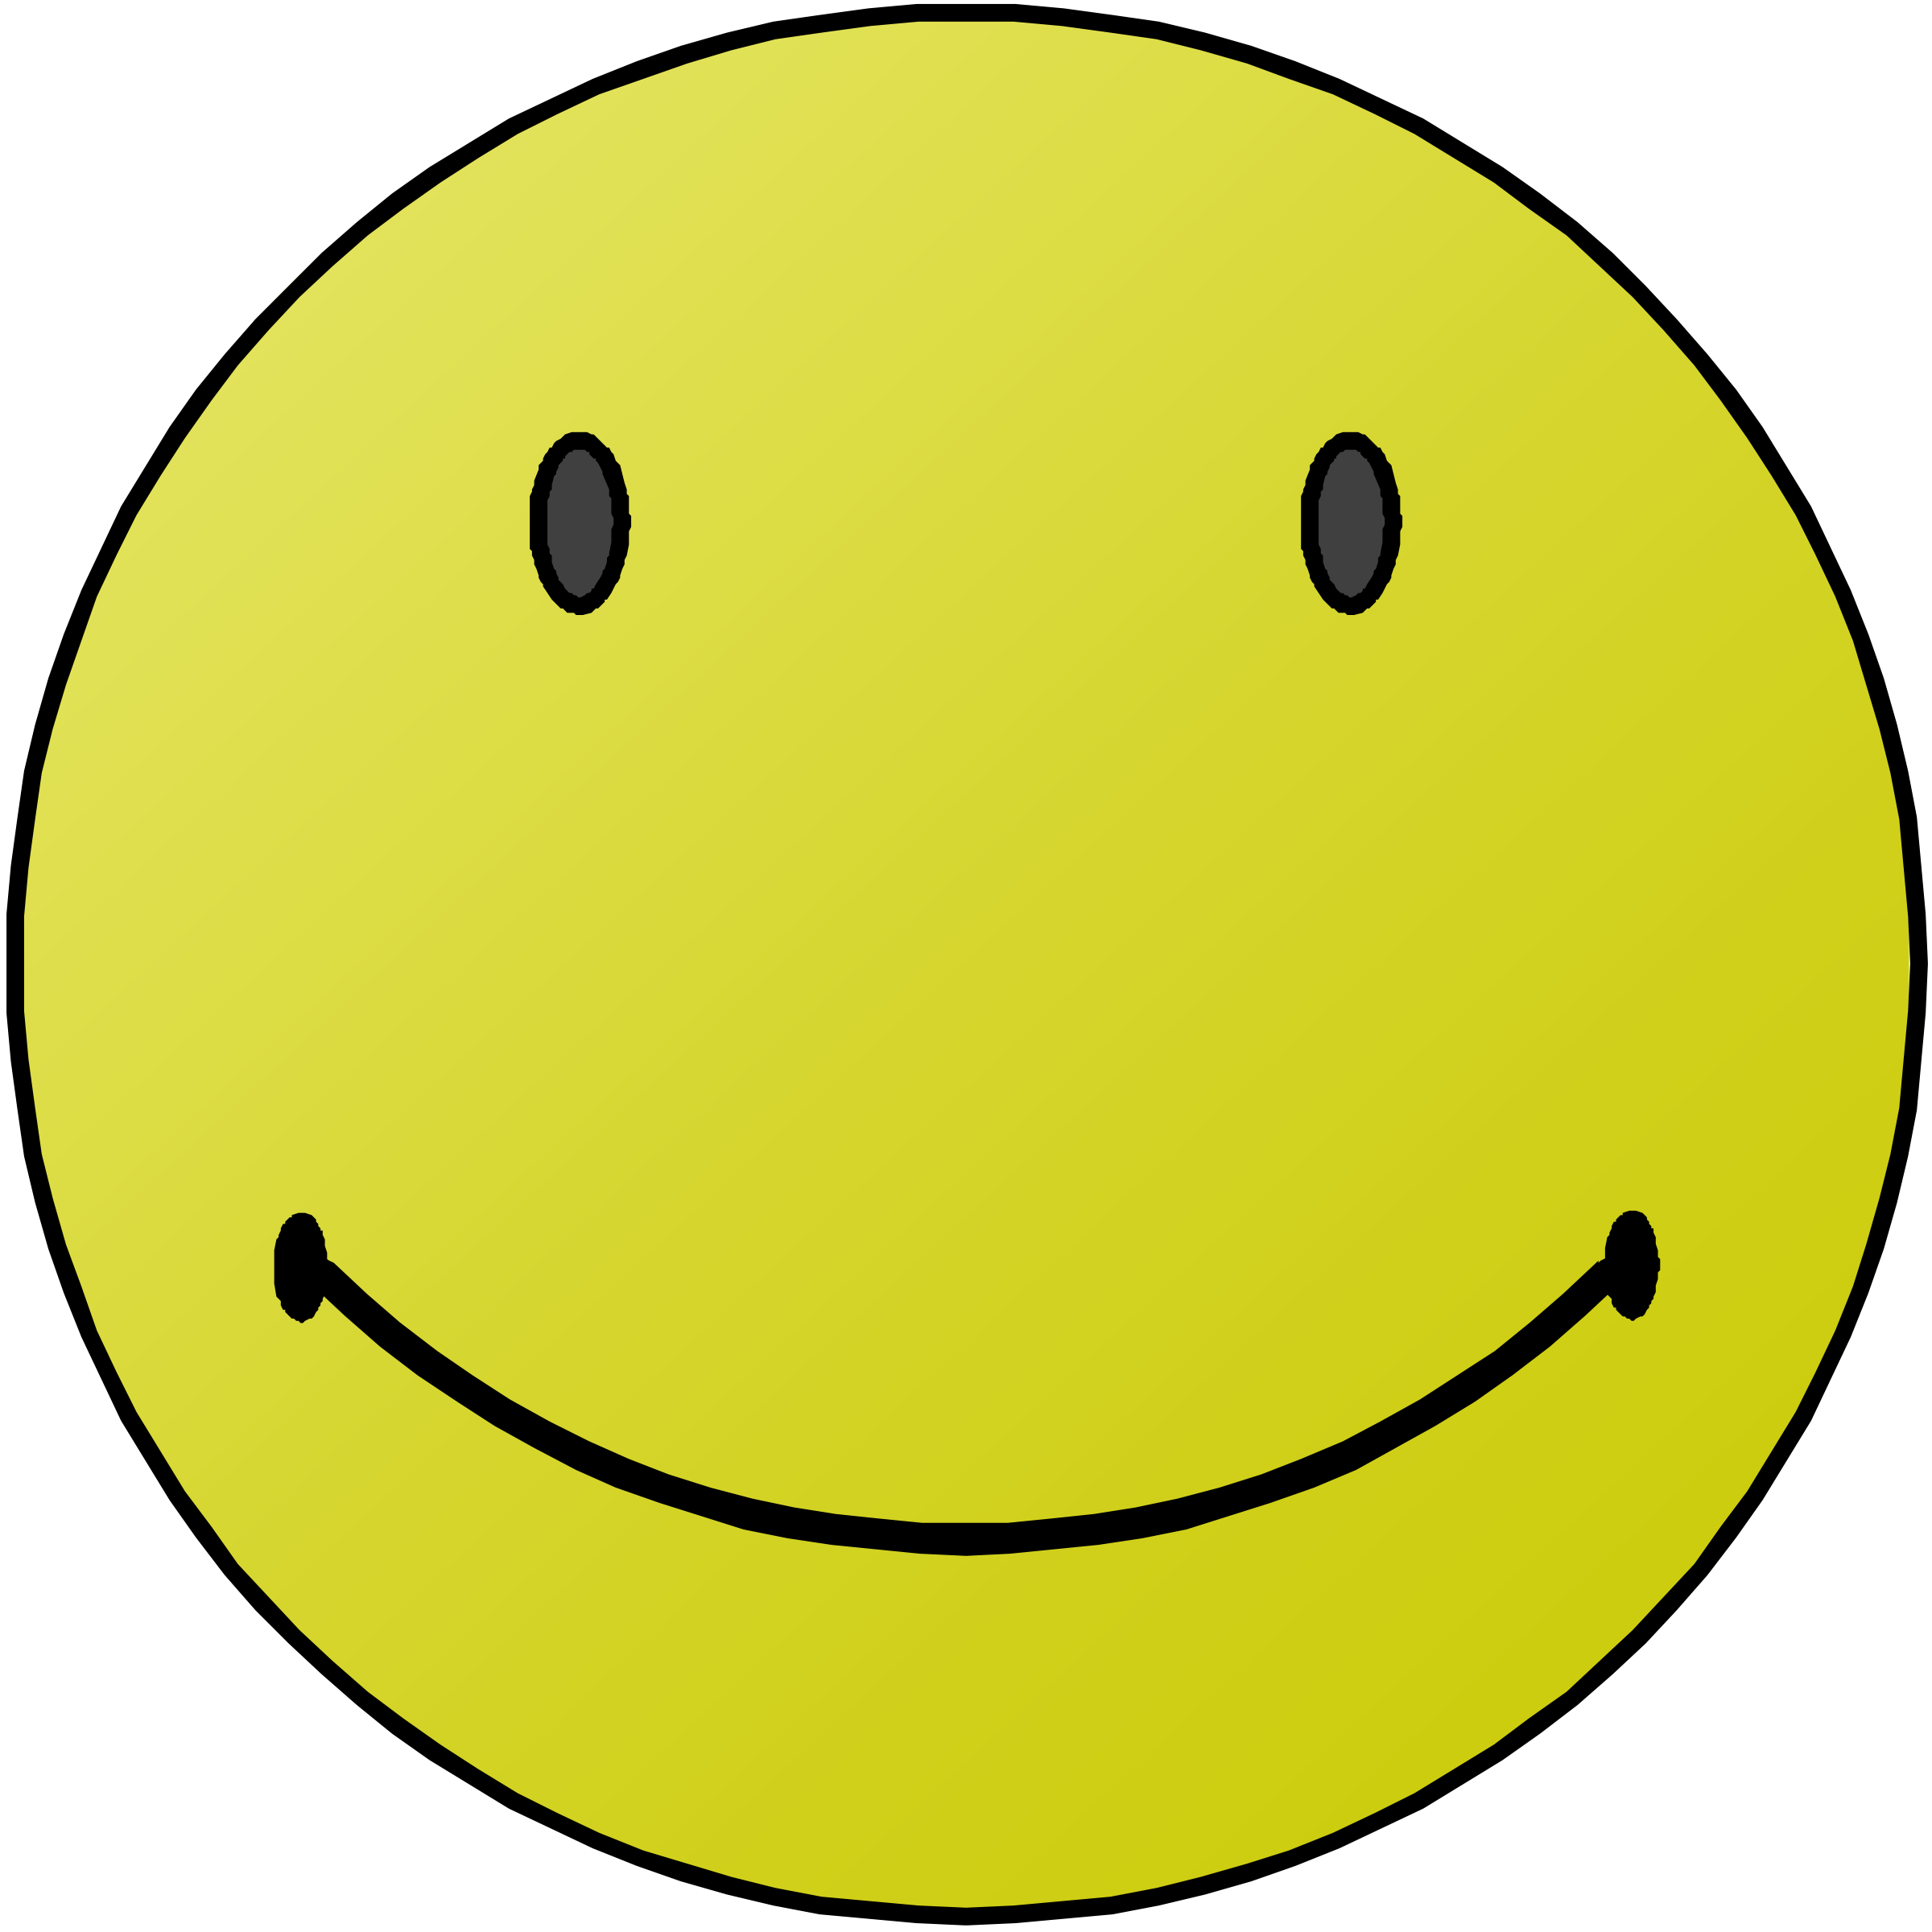 Happy Crying Smiley Face - ClipArt Best